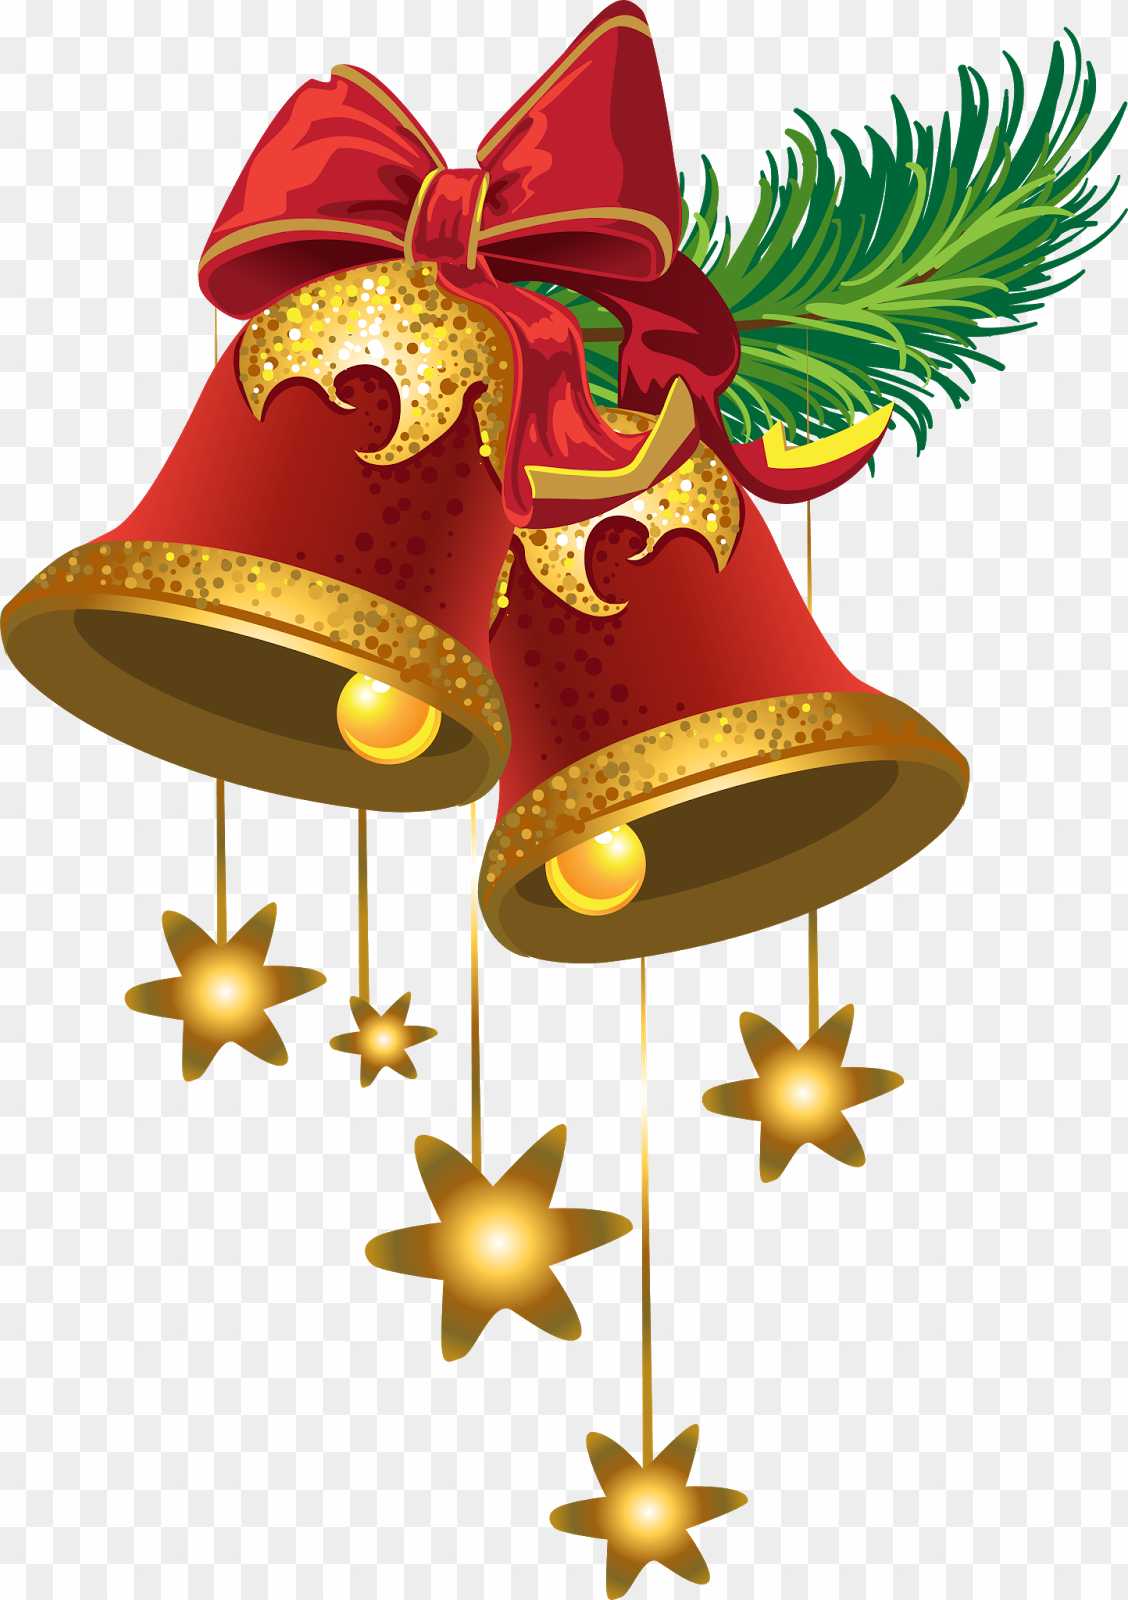 Christmas Day Bell png images download